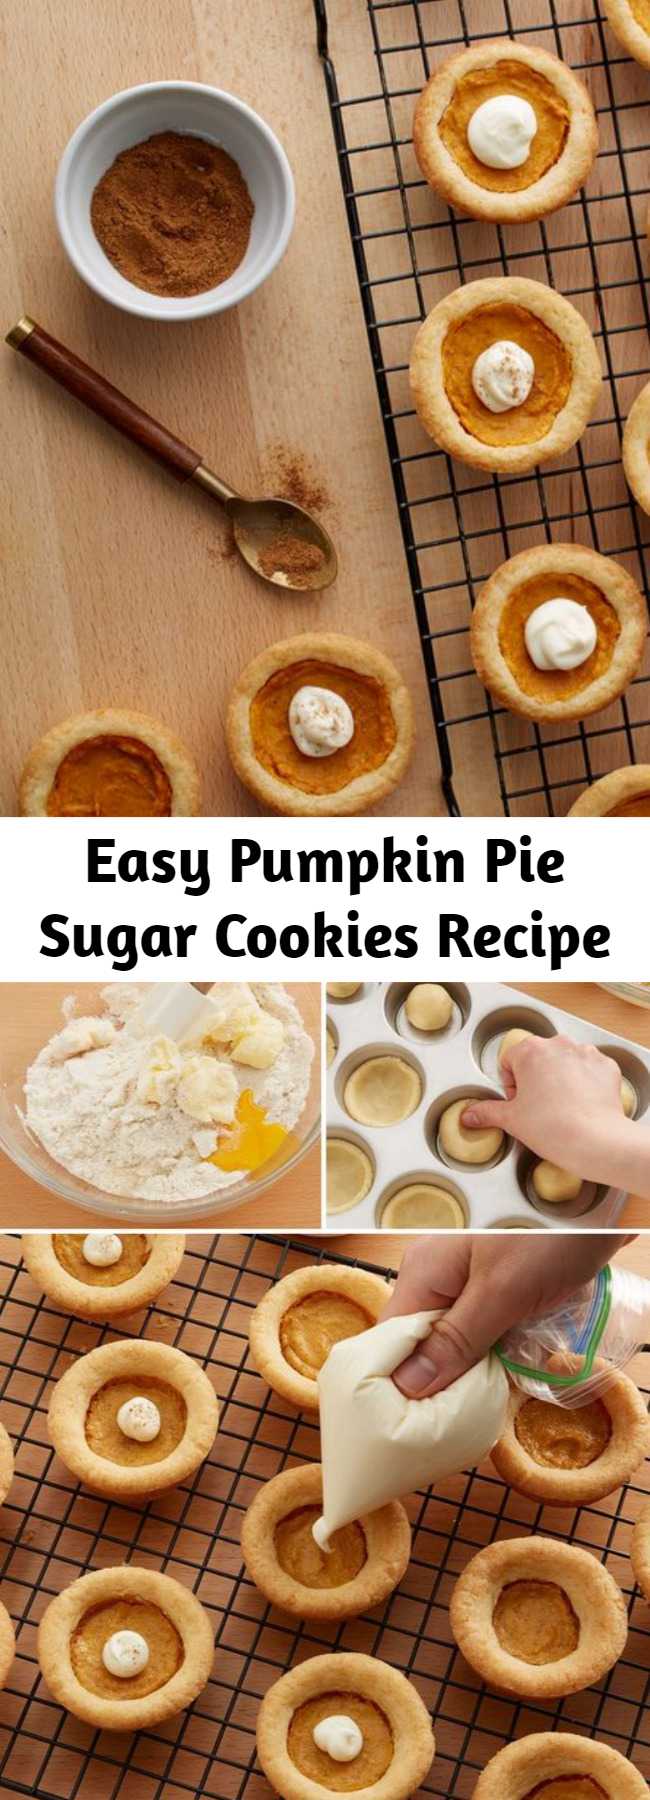 Easy Pumpkin Pie Sugar Cookies Recipe - These too-cute pumpkin pie-inspired sugar cookies are the perfect treat for fall or your Thanksgiving spread. With their sugar cookie crusts and pumpkin pie filling, these petite sweets are perfect for pleasing kiddos, diversifying the dessert spread and cutting down on the labor-intensive pie-making process.